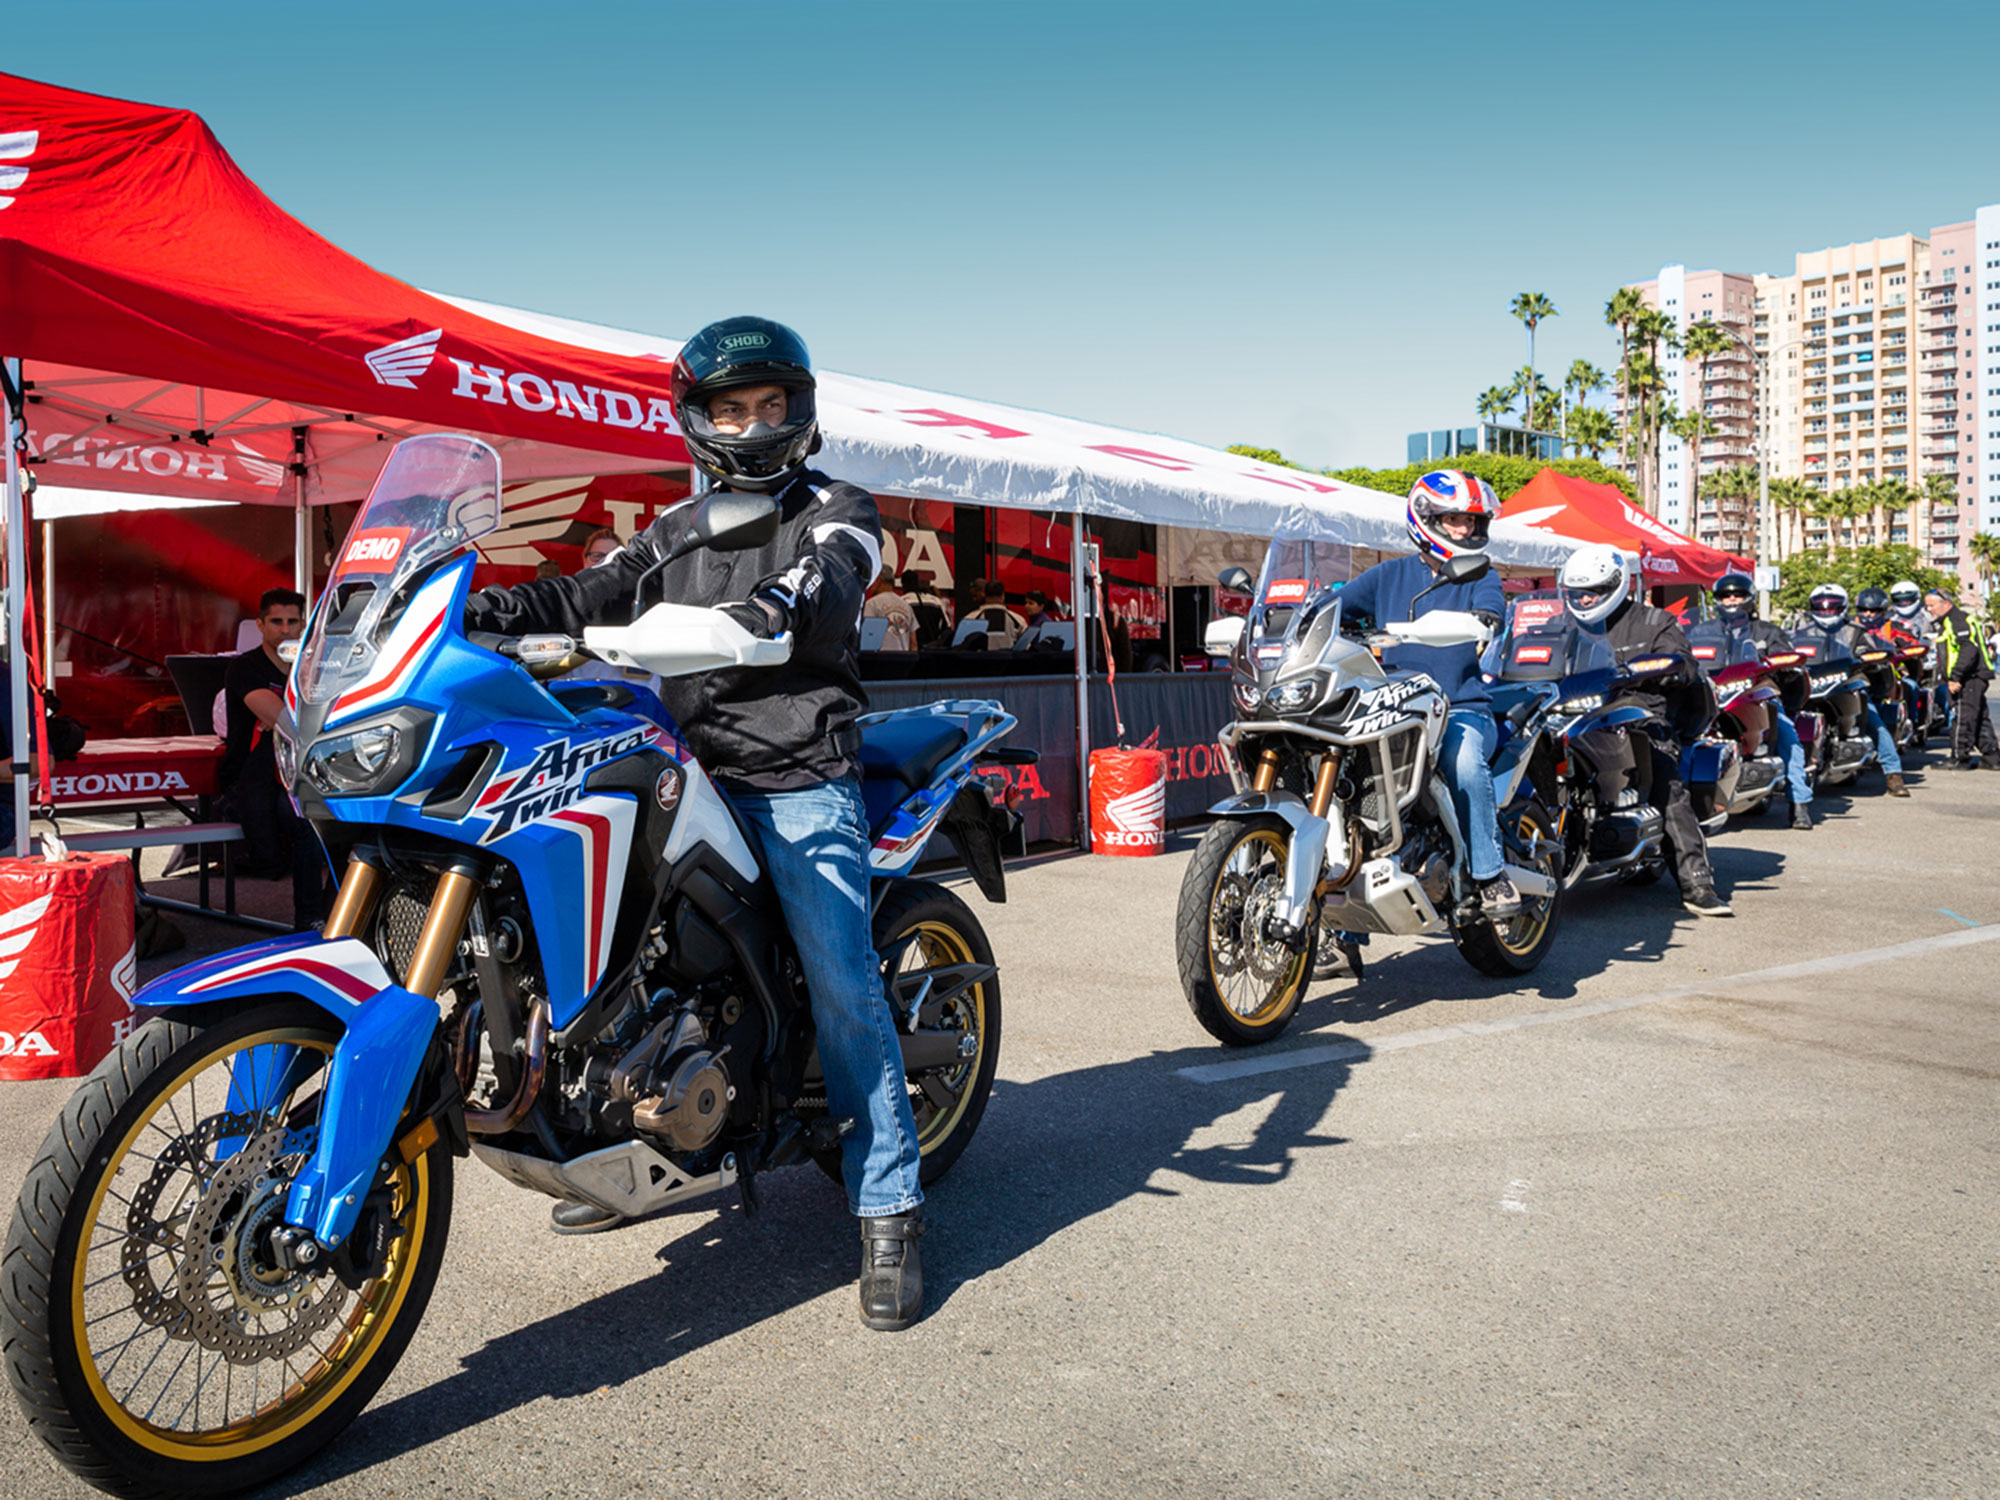 The International Motorcycle Show Heads Outdoors For 2021 Dates And Locations Announced Cycle World